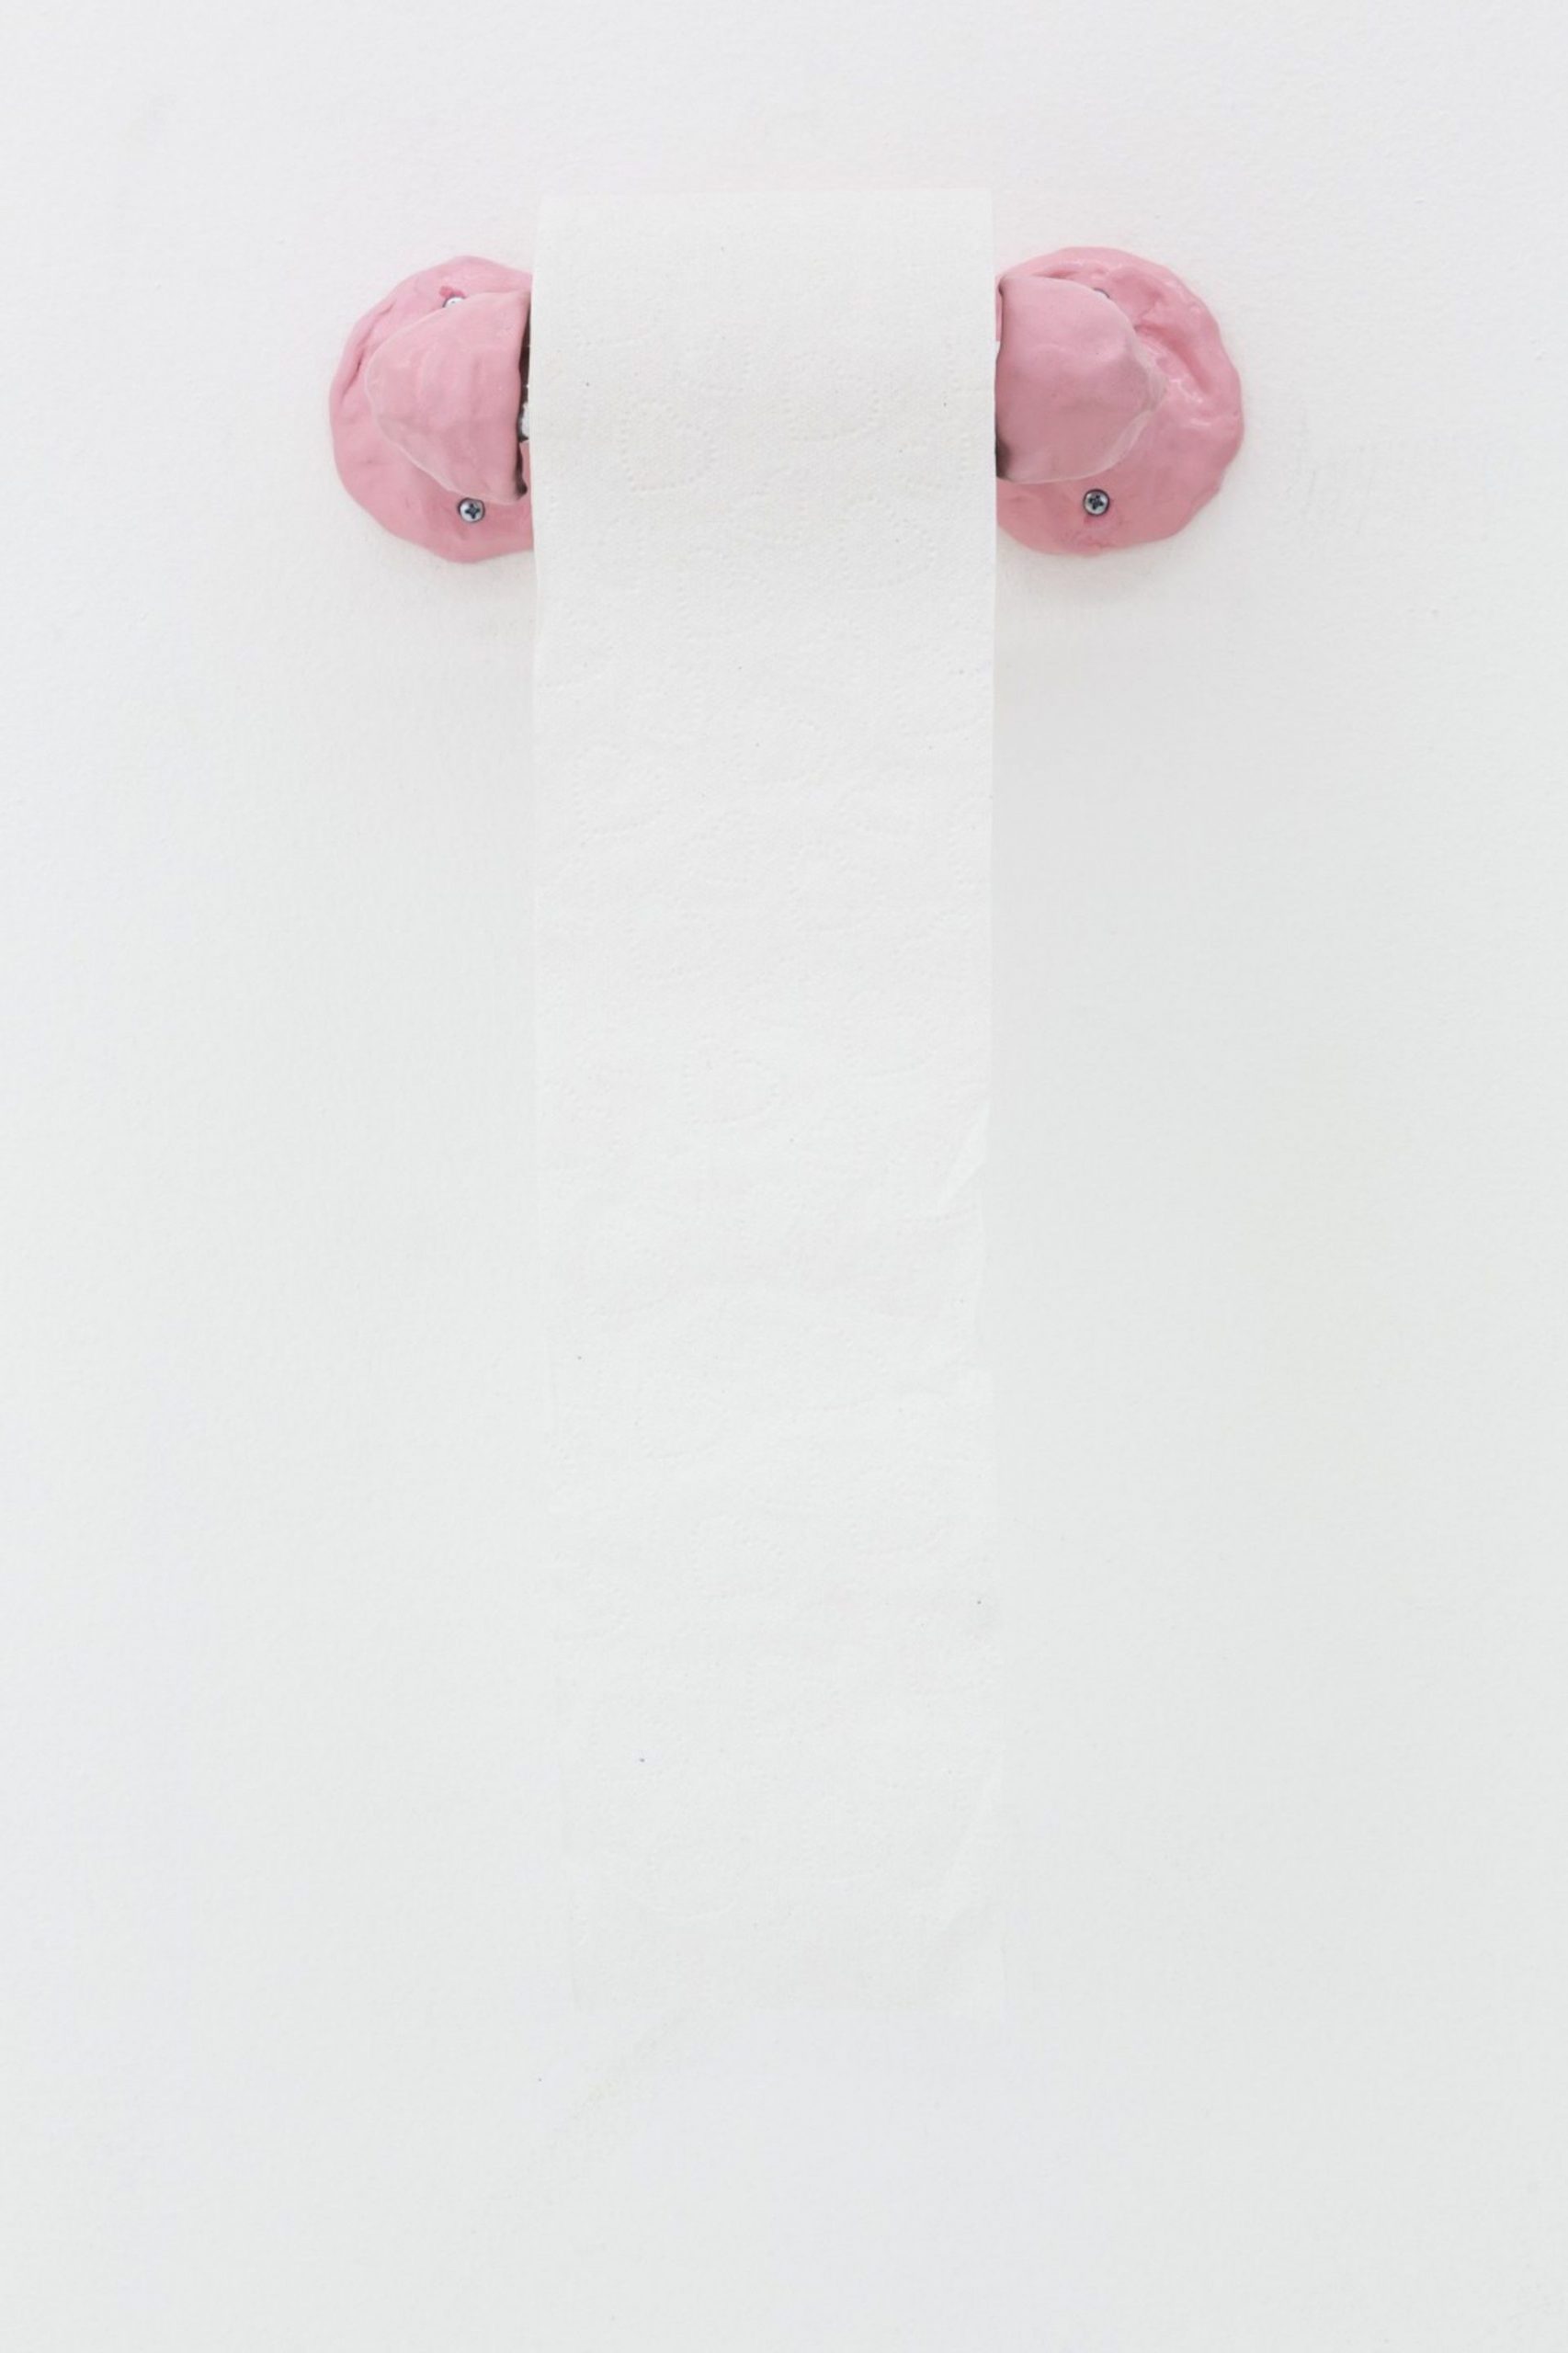 Pink Toilet Paper Holder by Katie Stout for exhibition Docile/Domicile/Dandy at Gallery Diet, Miami 2015